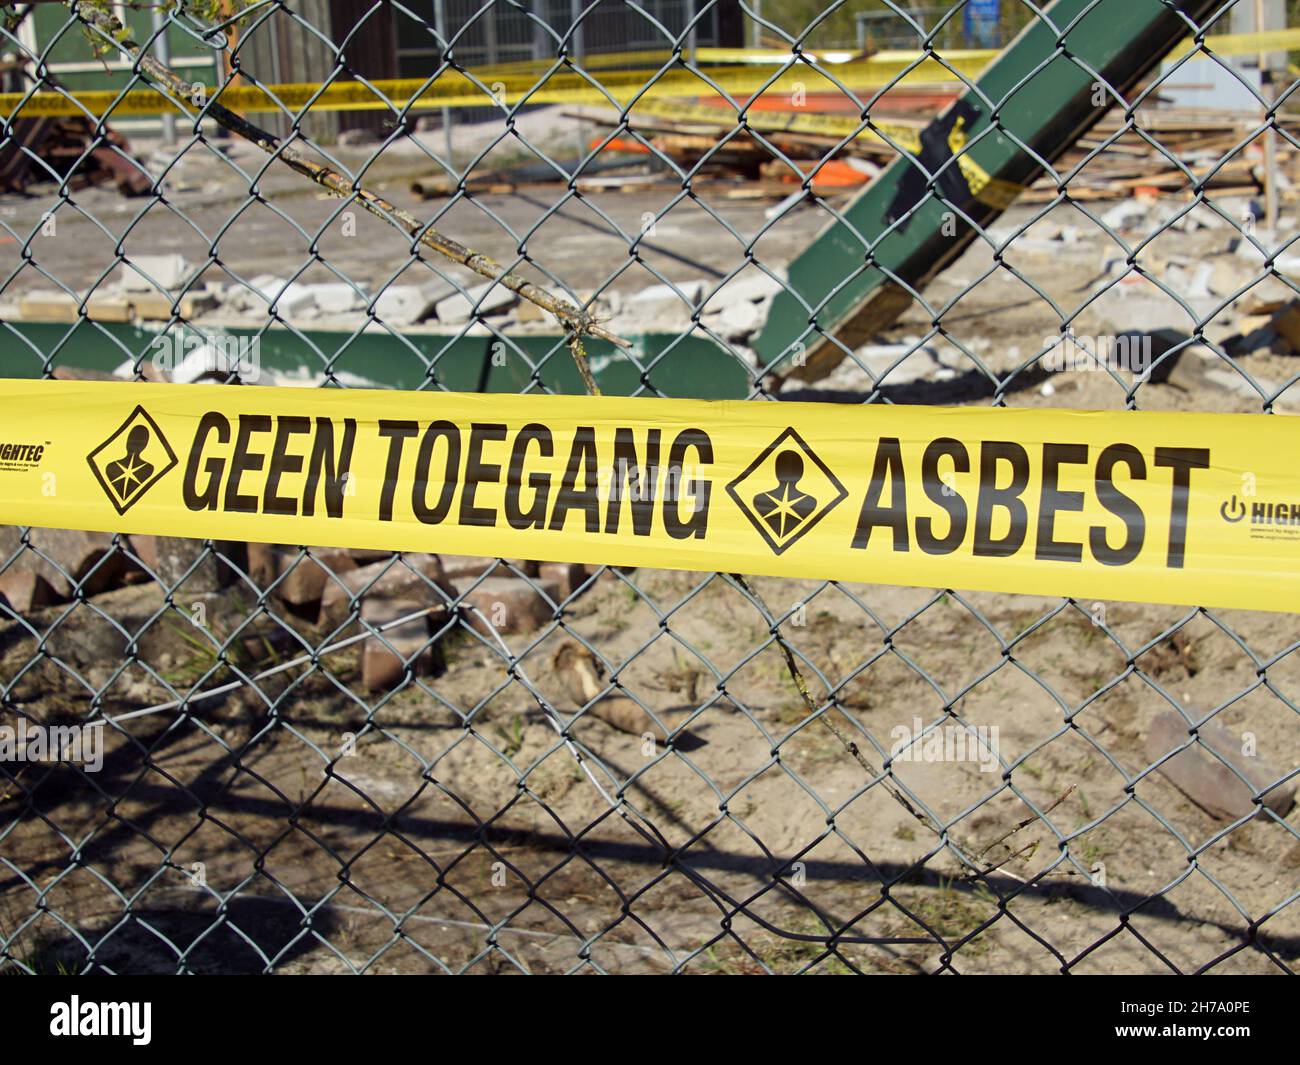 Katwijk, the Netherlands - April 27, 2021:  Dutch attention sign warning for prohibited access due to asbestos Stock Photo